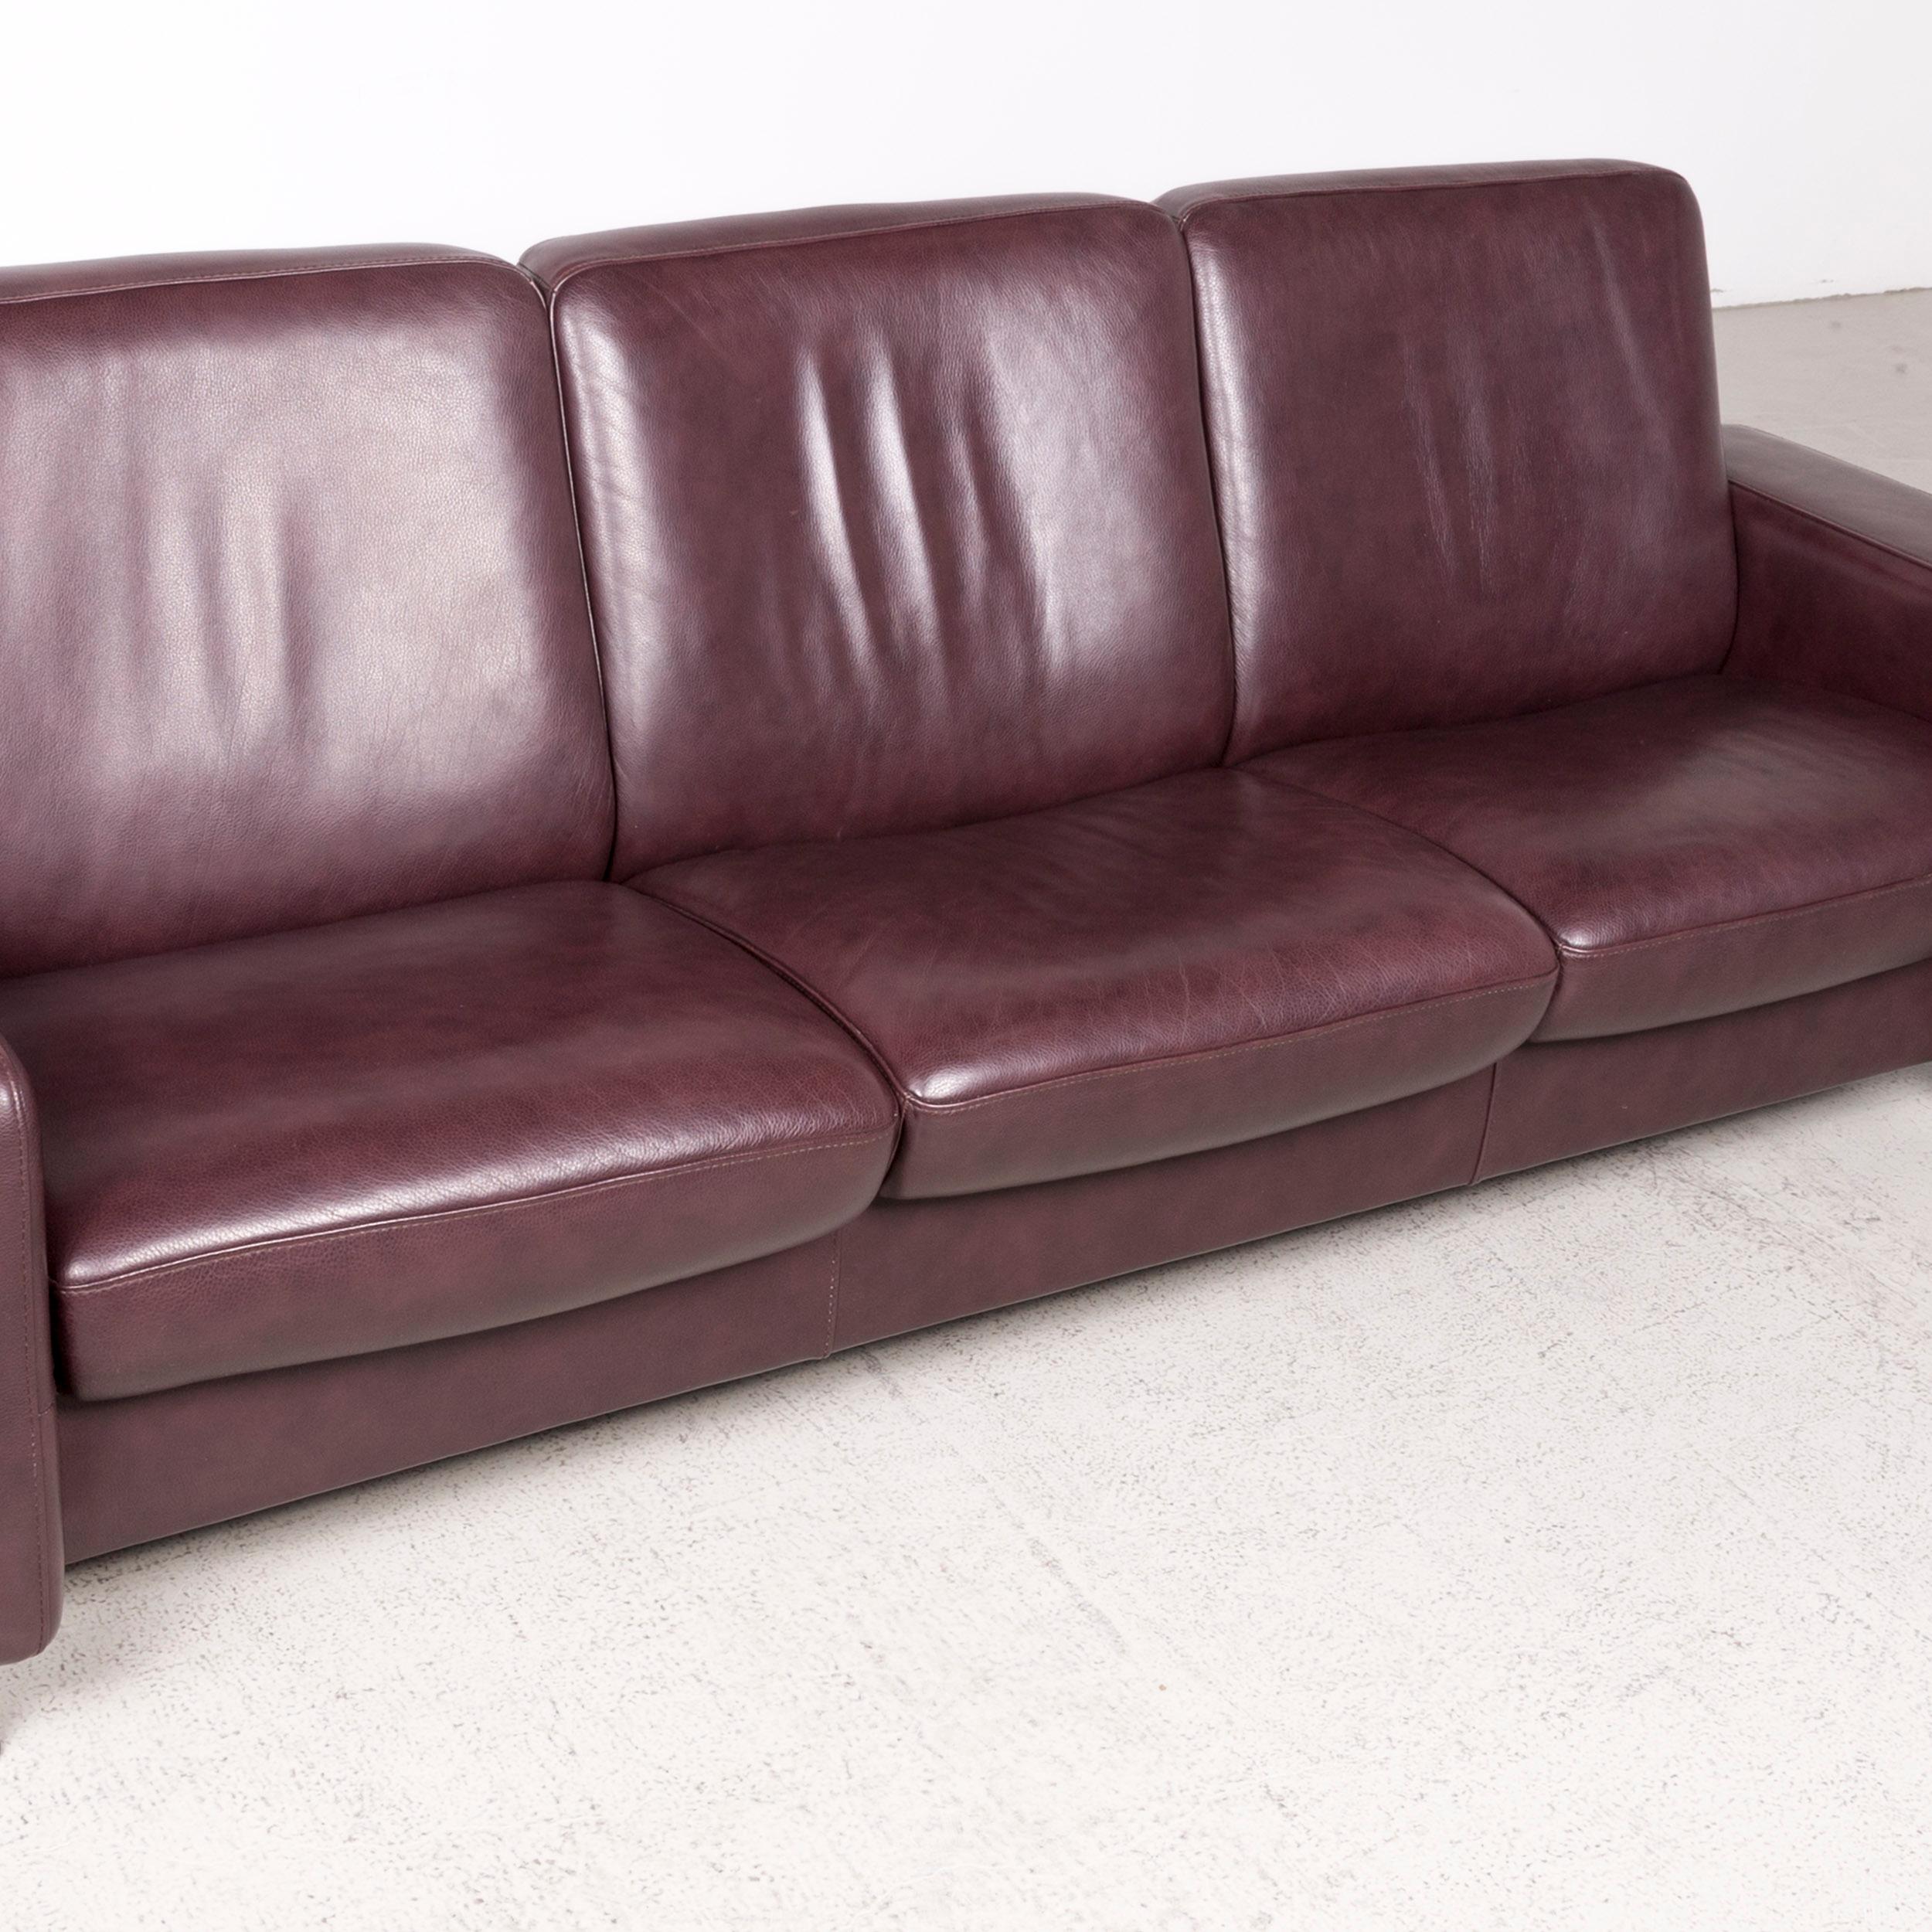 Modern Stressless Jazz Designer Leather Sofa Eggplant Three-Seat Real Leather Couch